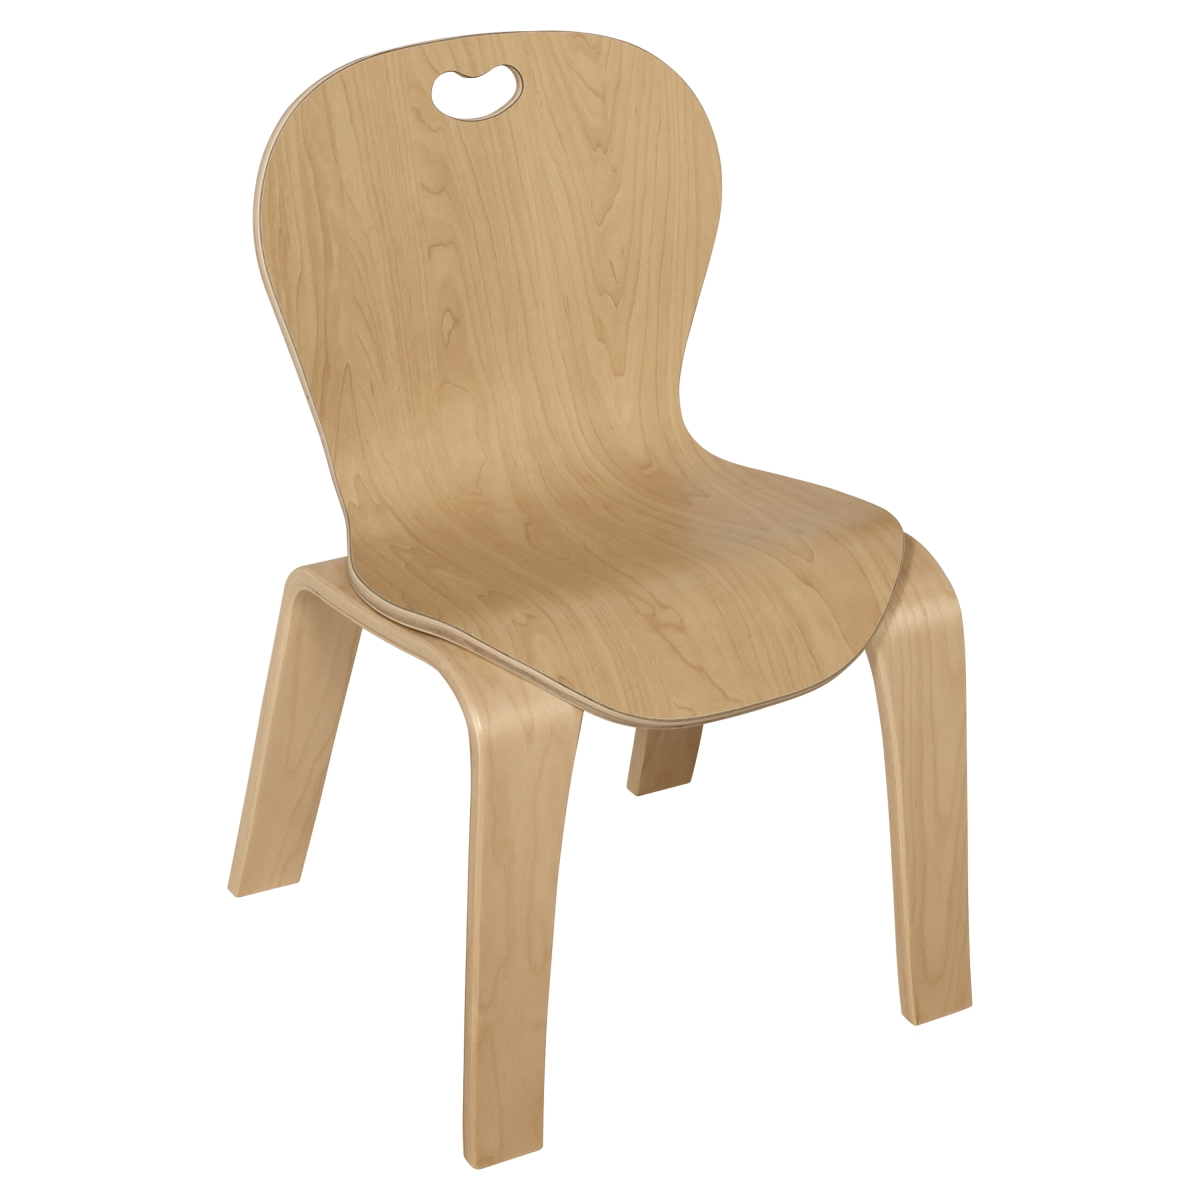 Mh881201 12 In. Bentwood Kids Chair